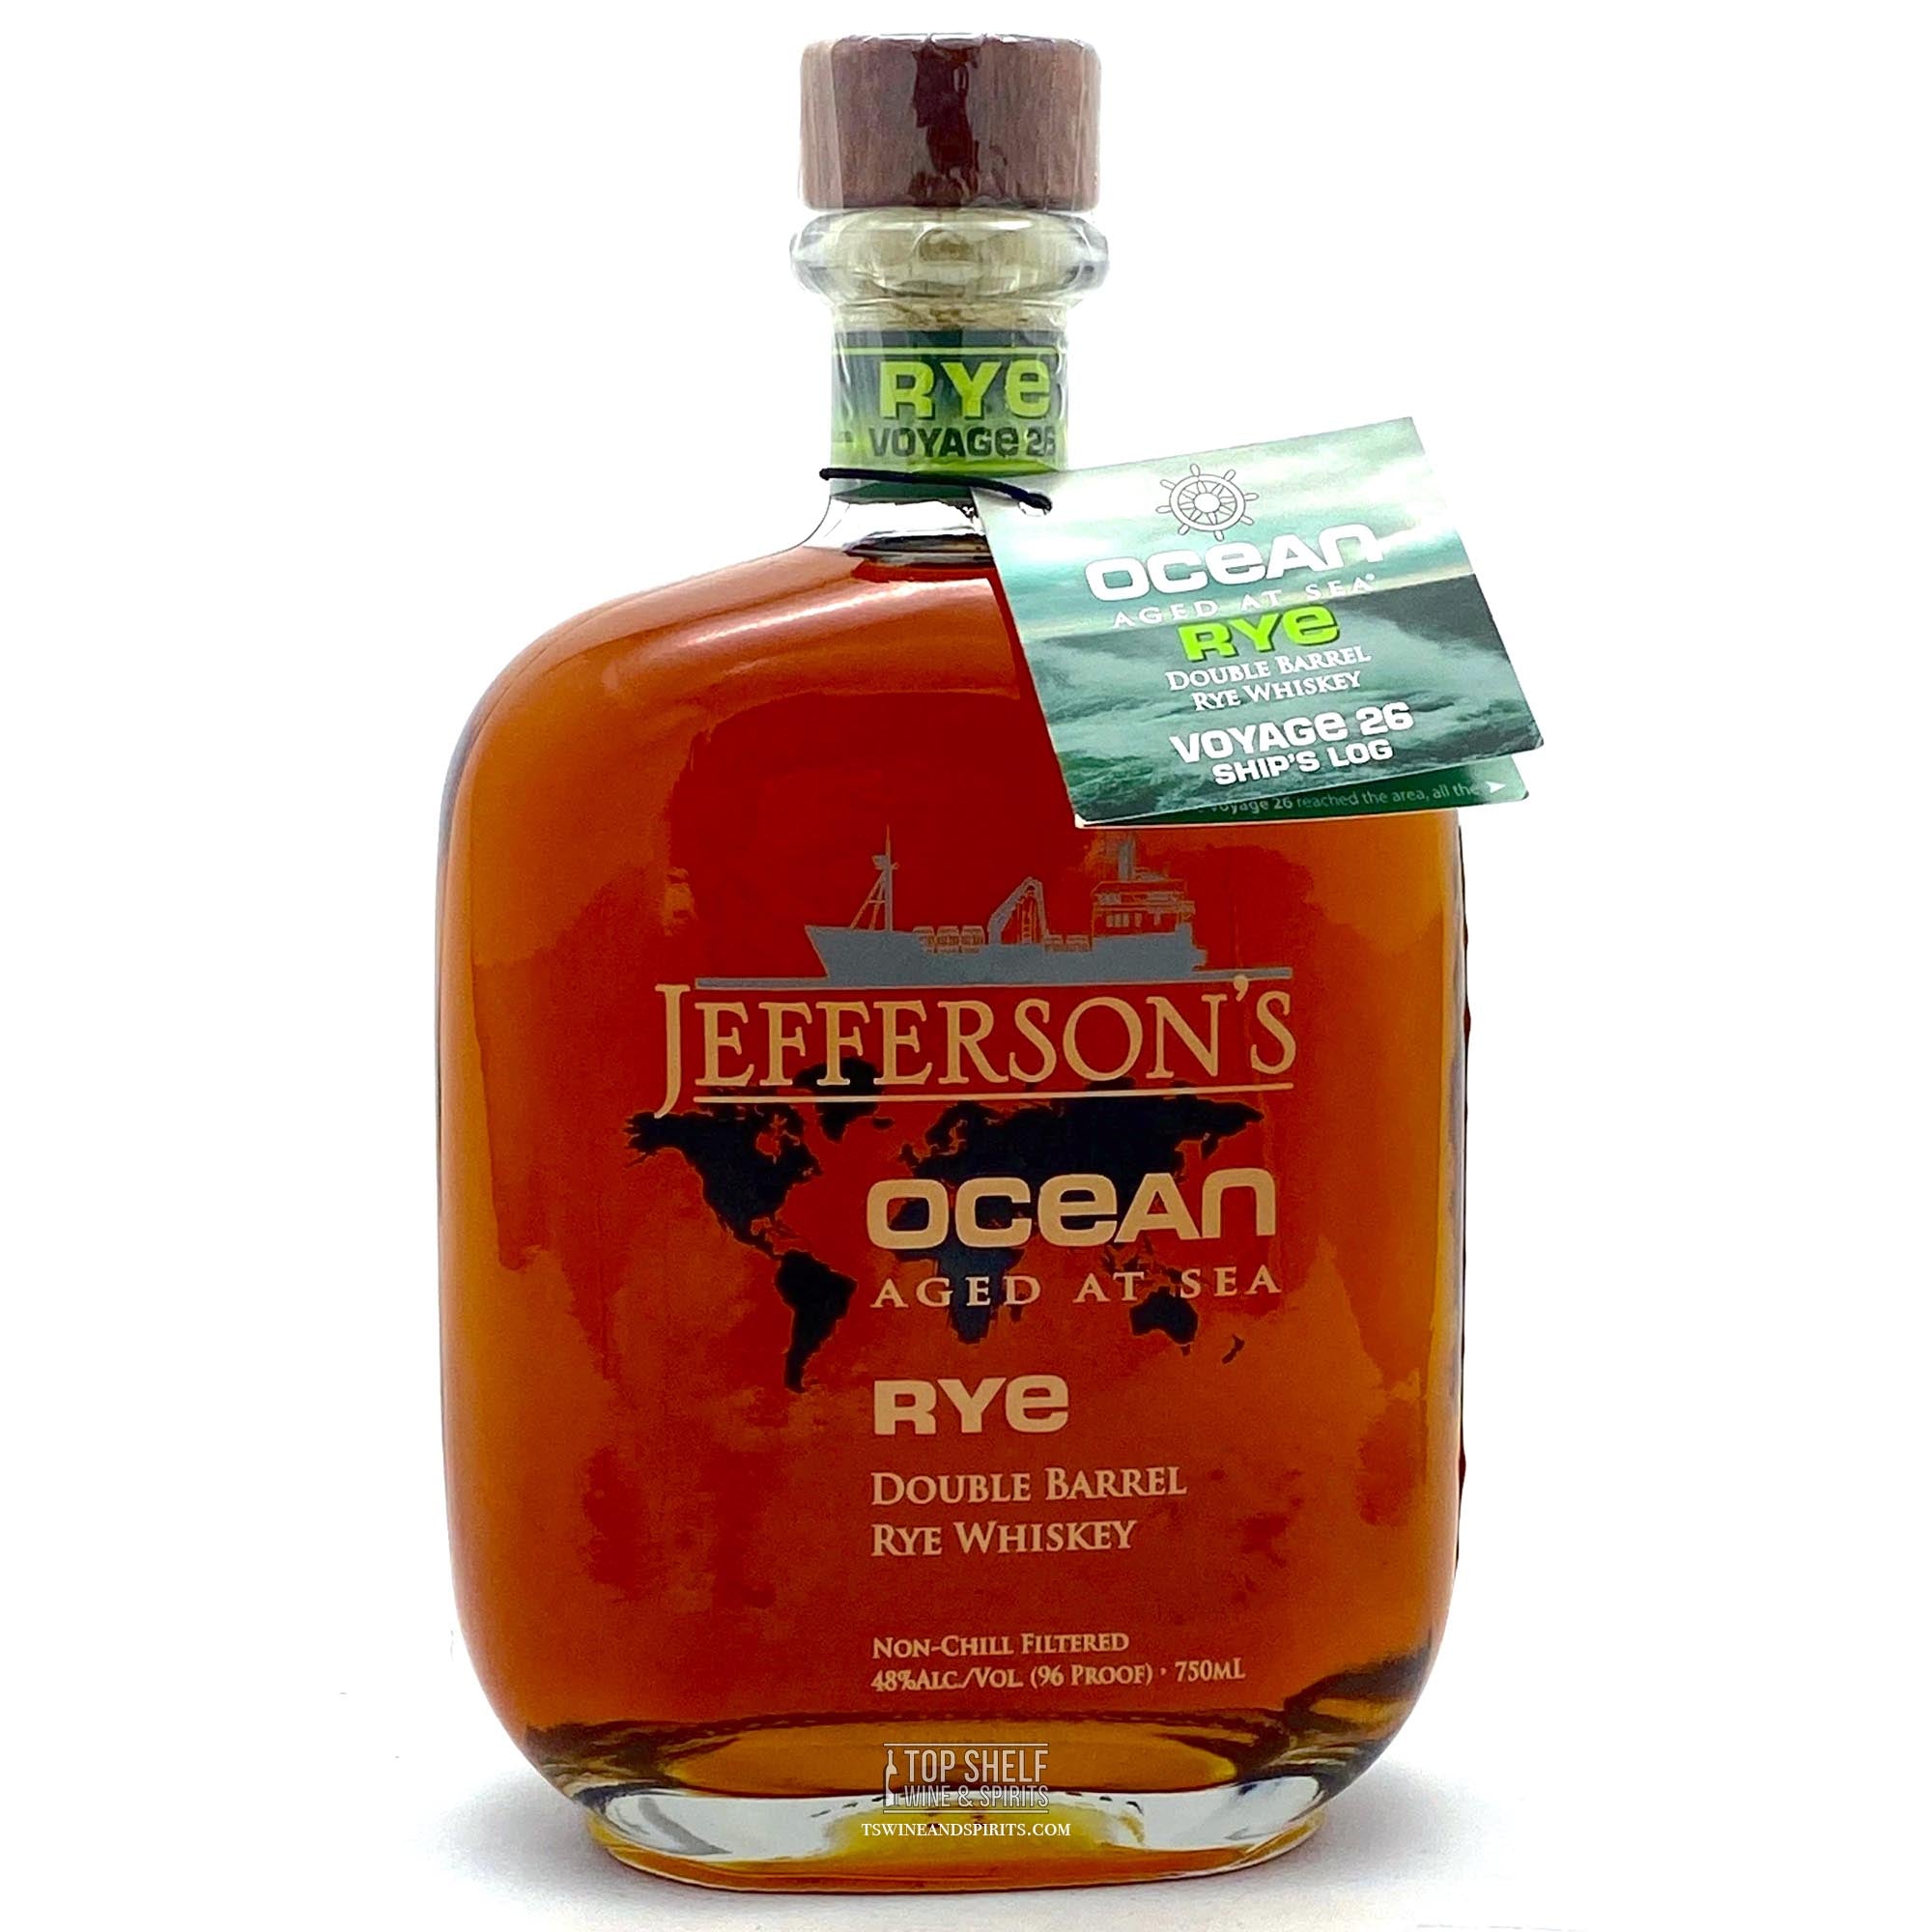 Jefferson's Ocean Aged At Sea Voyage 26 Rye Whiskey